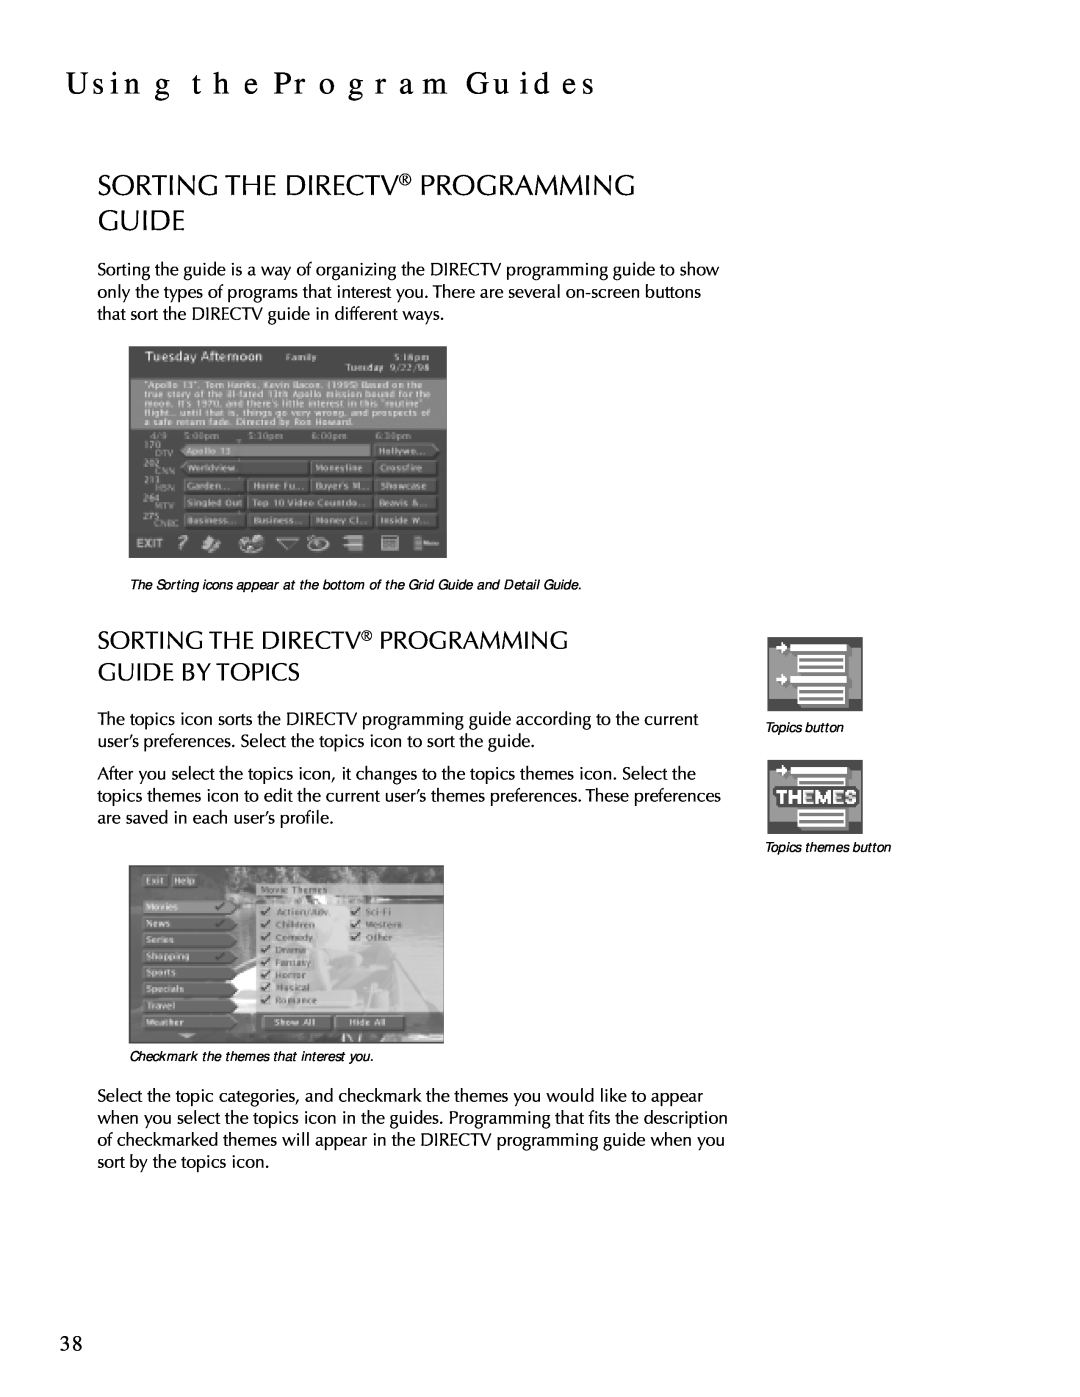 DirecTV HDTV user manual Sorting The Directv Programming Guide By Topics, Using The Program Guides 